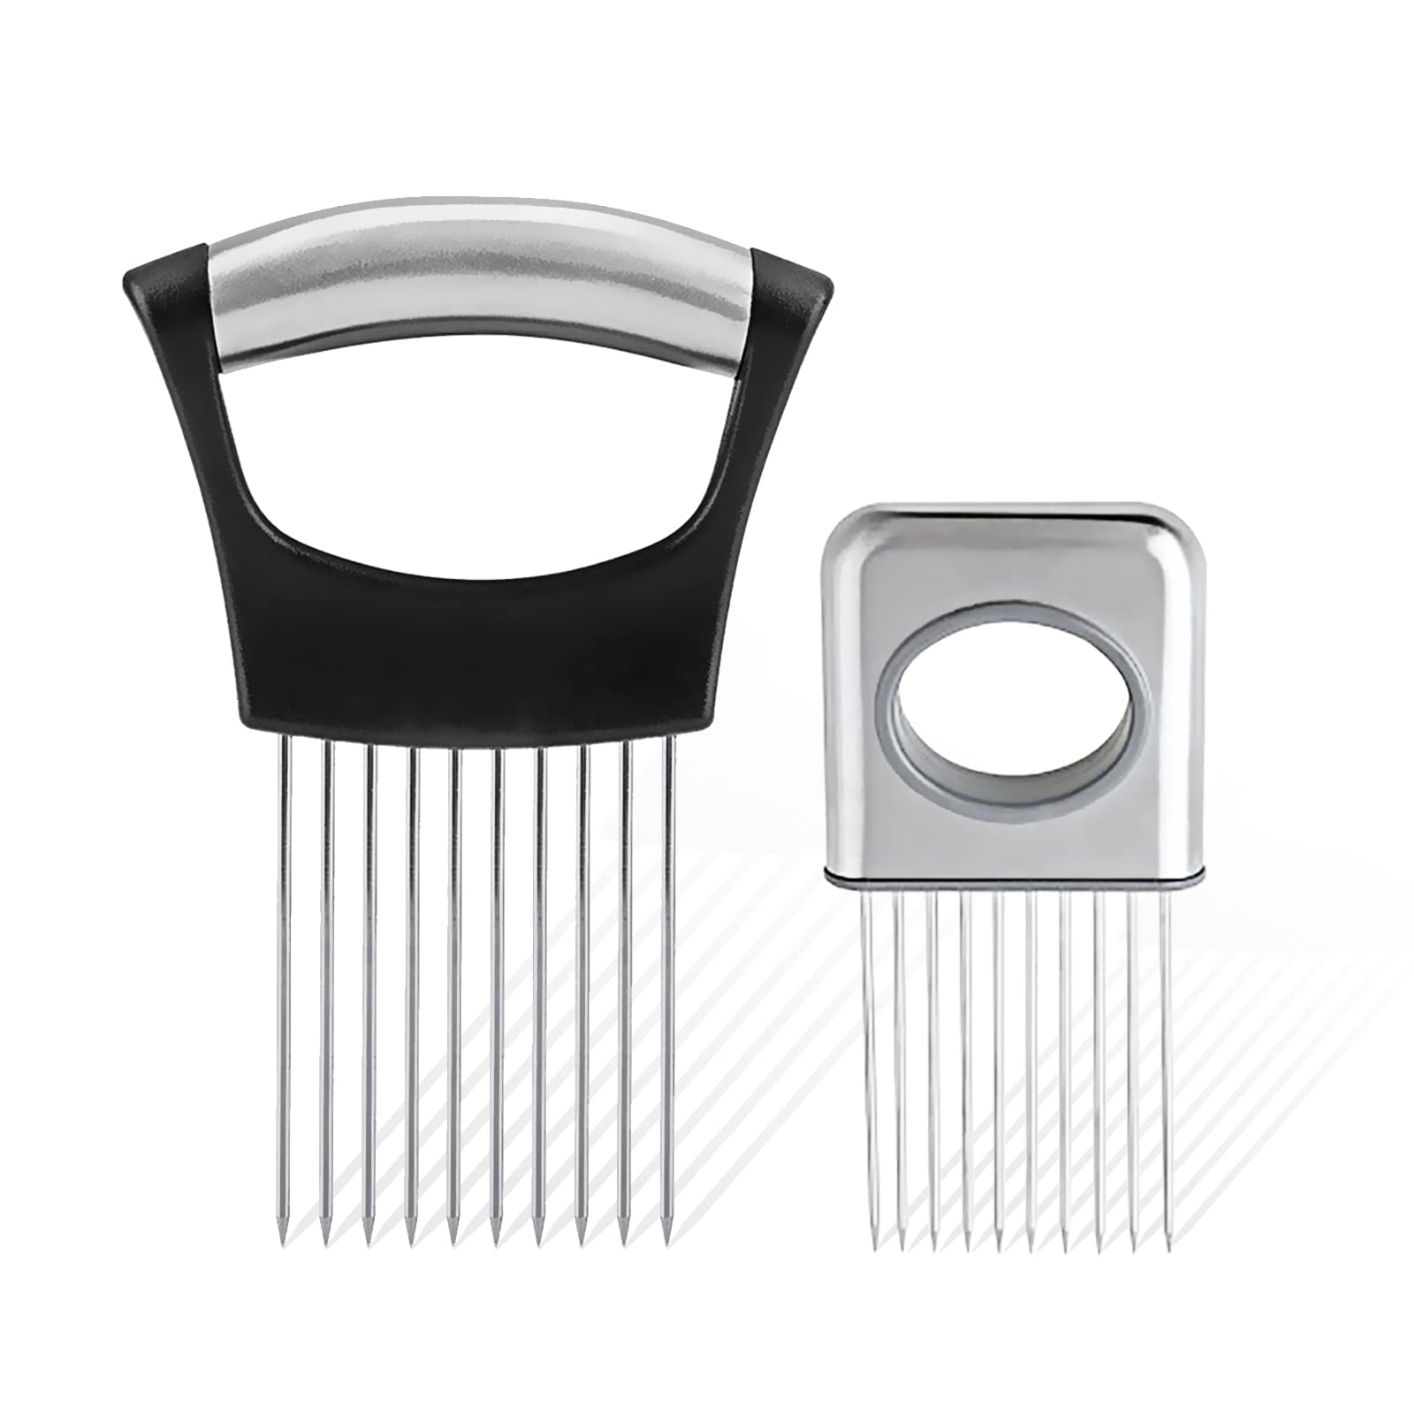 Onion Slicer Food Slice Assistant Stainless Steel Onion Holder Slicer Tool, Vegetable Potato Cutter Slicer, Cutting Kitchen Gadget Onion Cutter